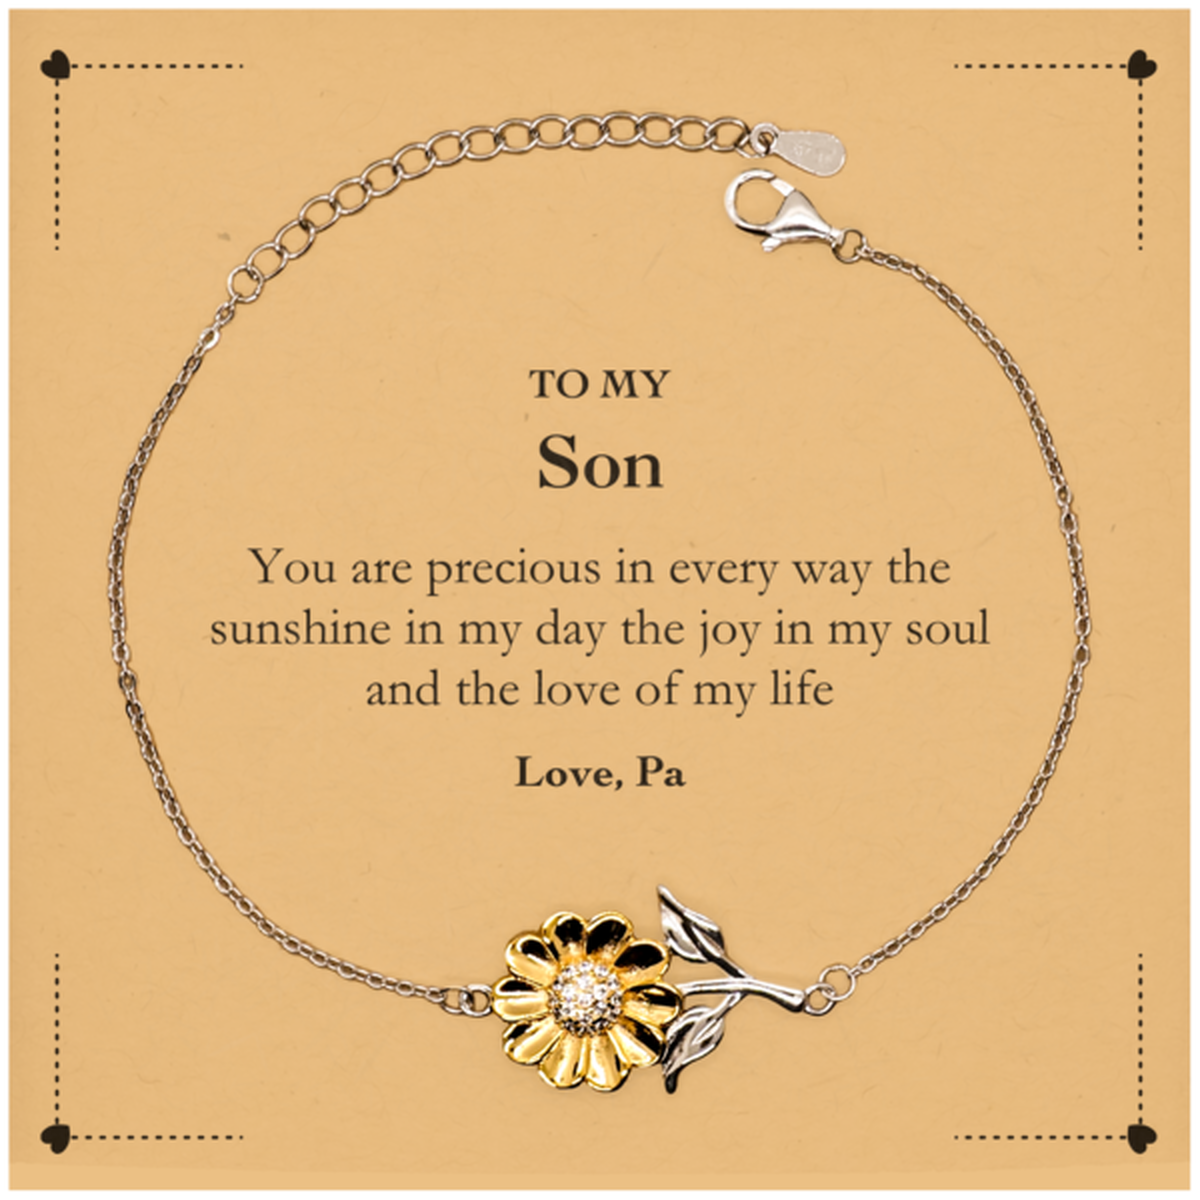 Graduation Gifts for Son Sunflower Bracelet Present from Pa, Christmas Son Birthday Gifts Son You are precious in every way the sunshine in my day. Love, Pa